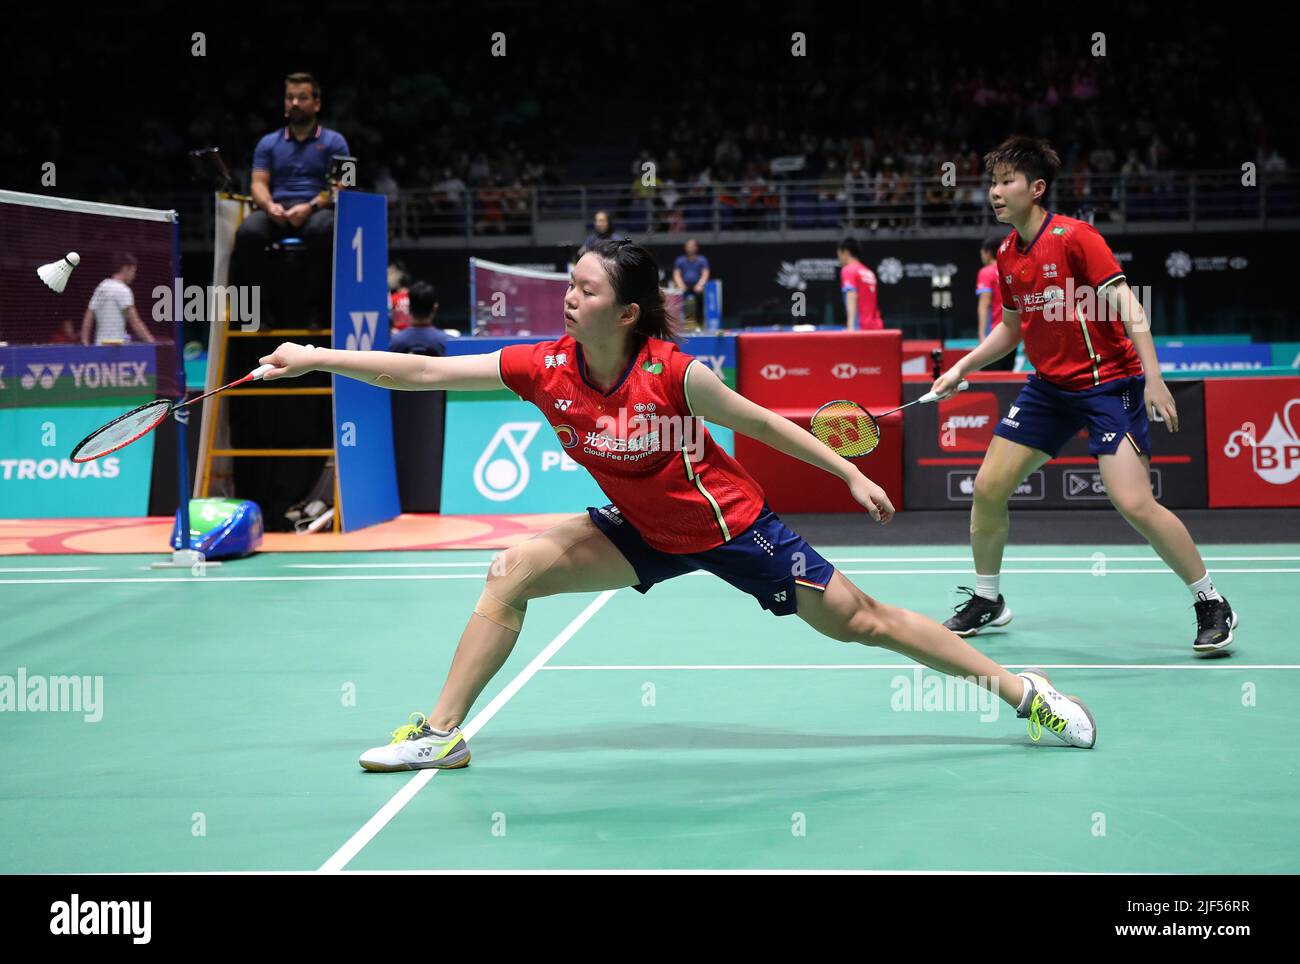 Kuala Lumpur, Malaysia. 29th June, 2022. Liu Xuan Xuan and Xia Yu Ting (R) of China play against Pearly Tan and Thinaah Muralitharan of Malaysia during the Women's Doubles round one match of the Petronas Malaysia Open 2022 at Axiata Arena, Bukit Jalil. (Photo by Wong Fok Loy/SOPA Images/Sipa USA) Credit: Sipa USA/Alamy Live News Stock Photo